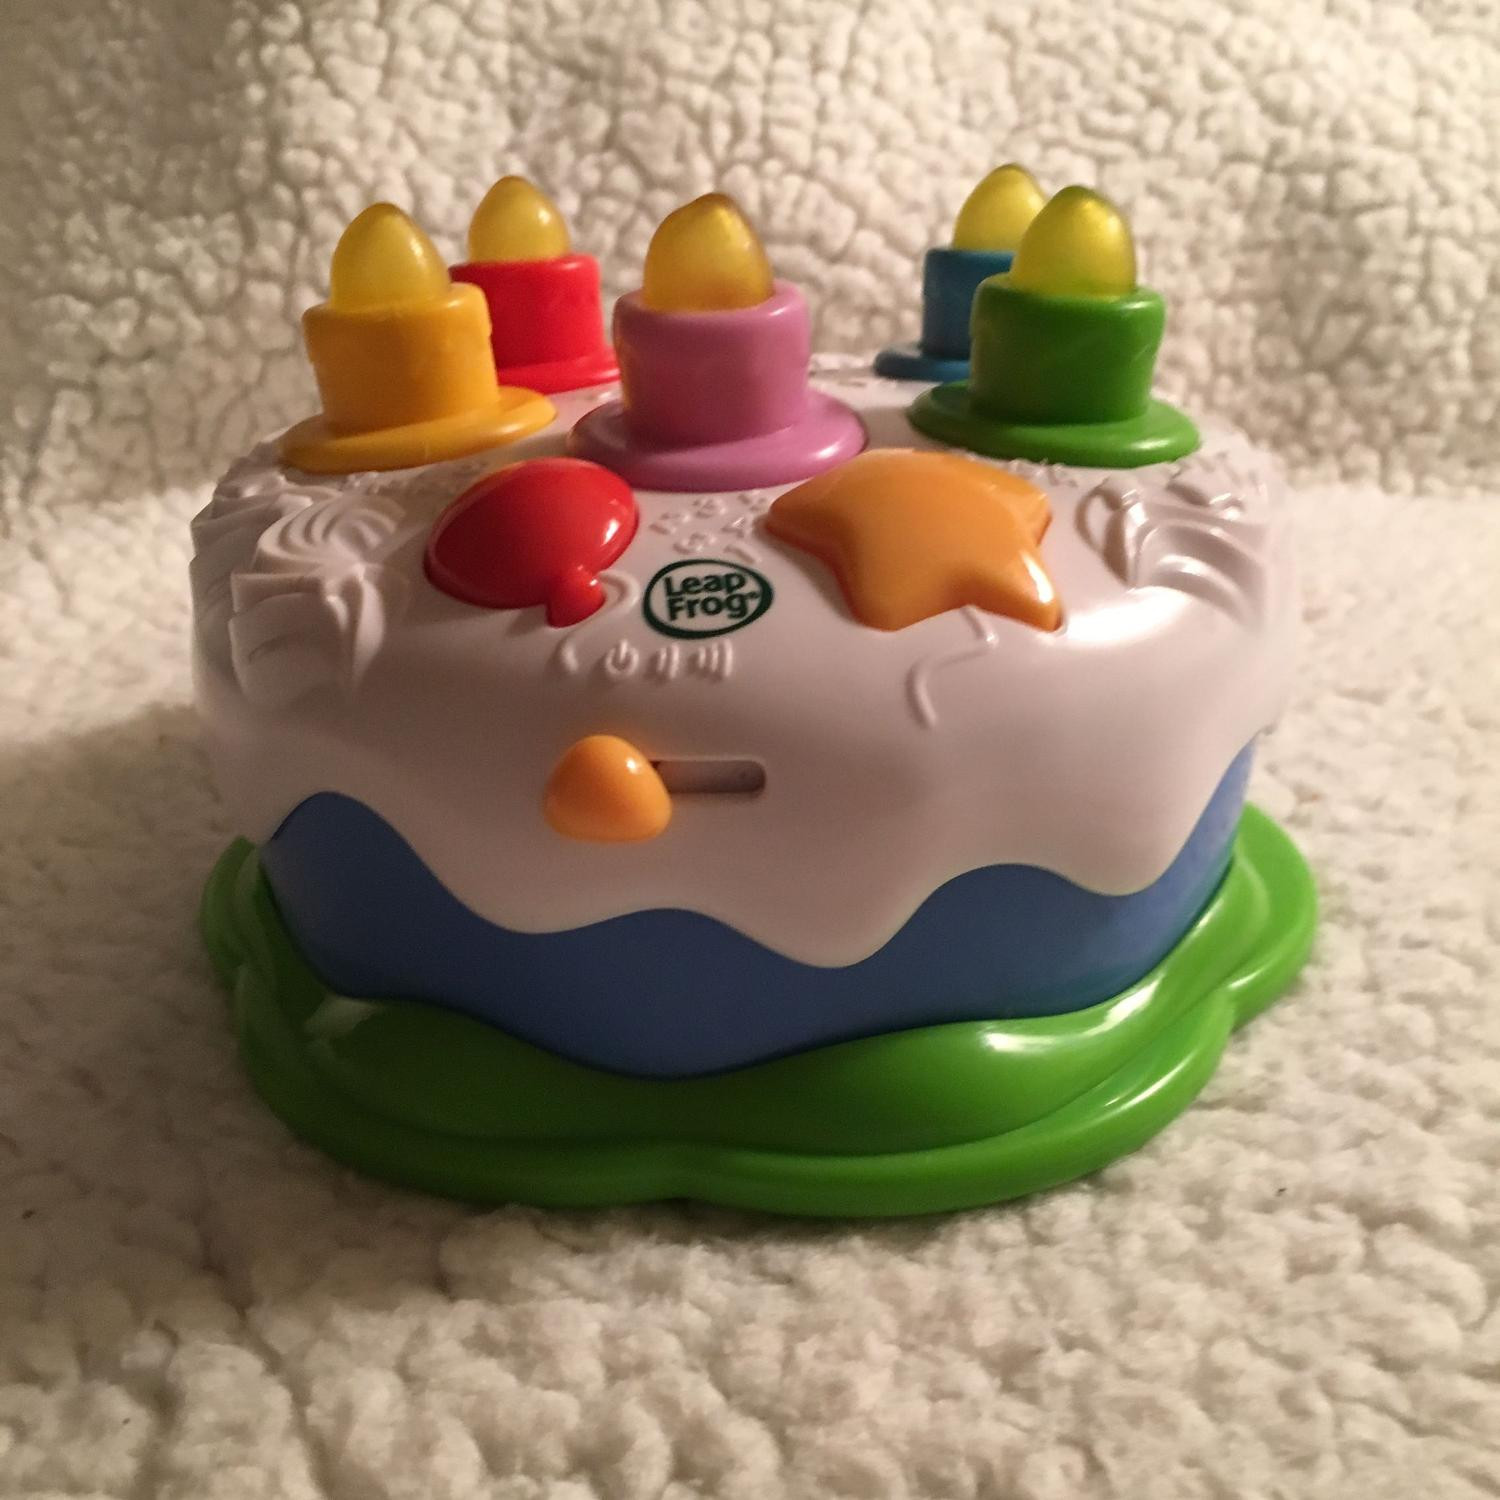 Leapfrog Counting Candles Birthday Cake
 Find more Leap Frog Birthday Cake Counting Candles for